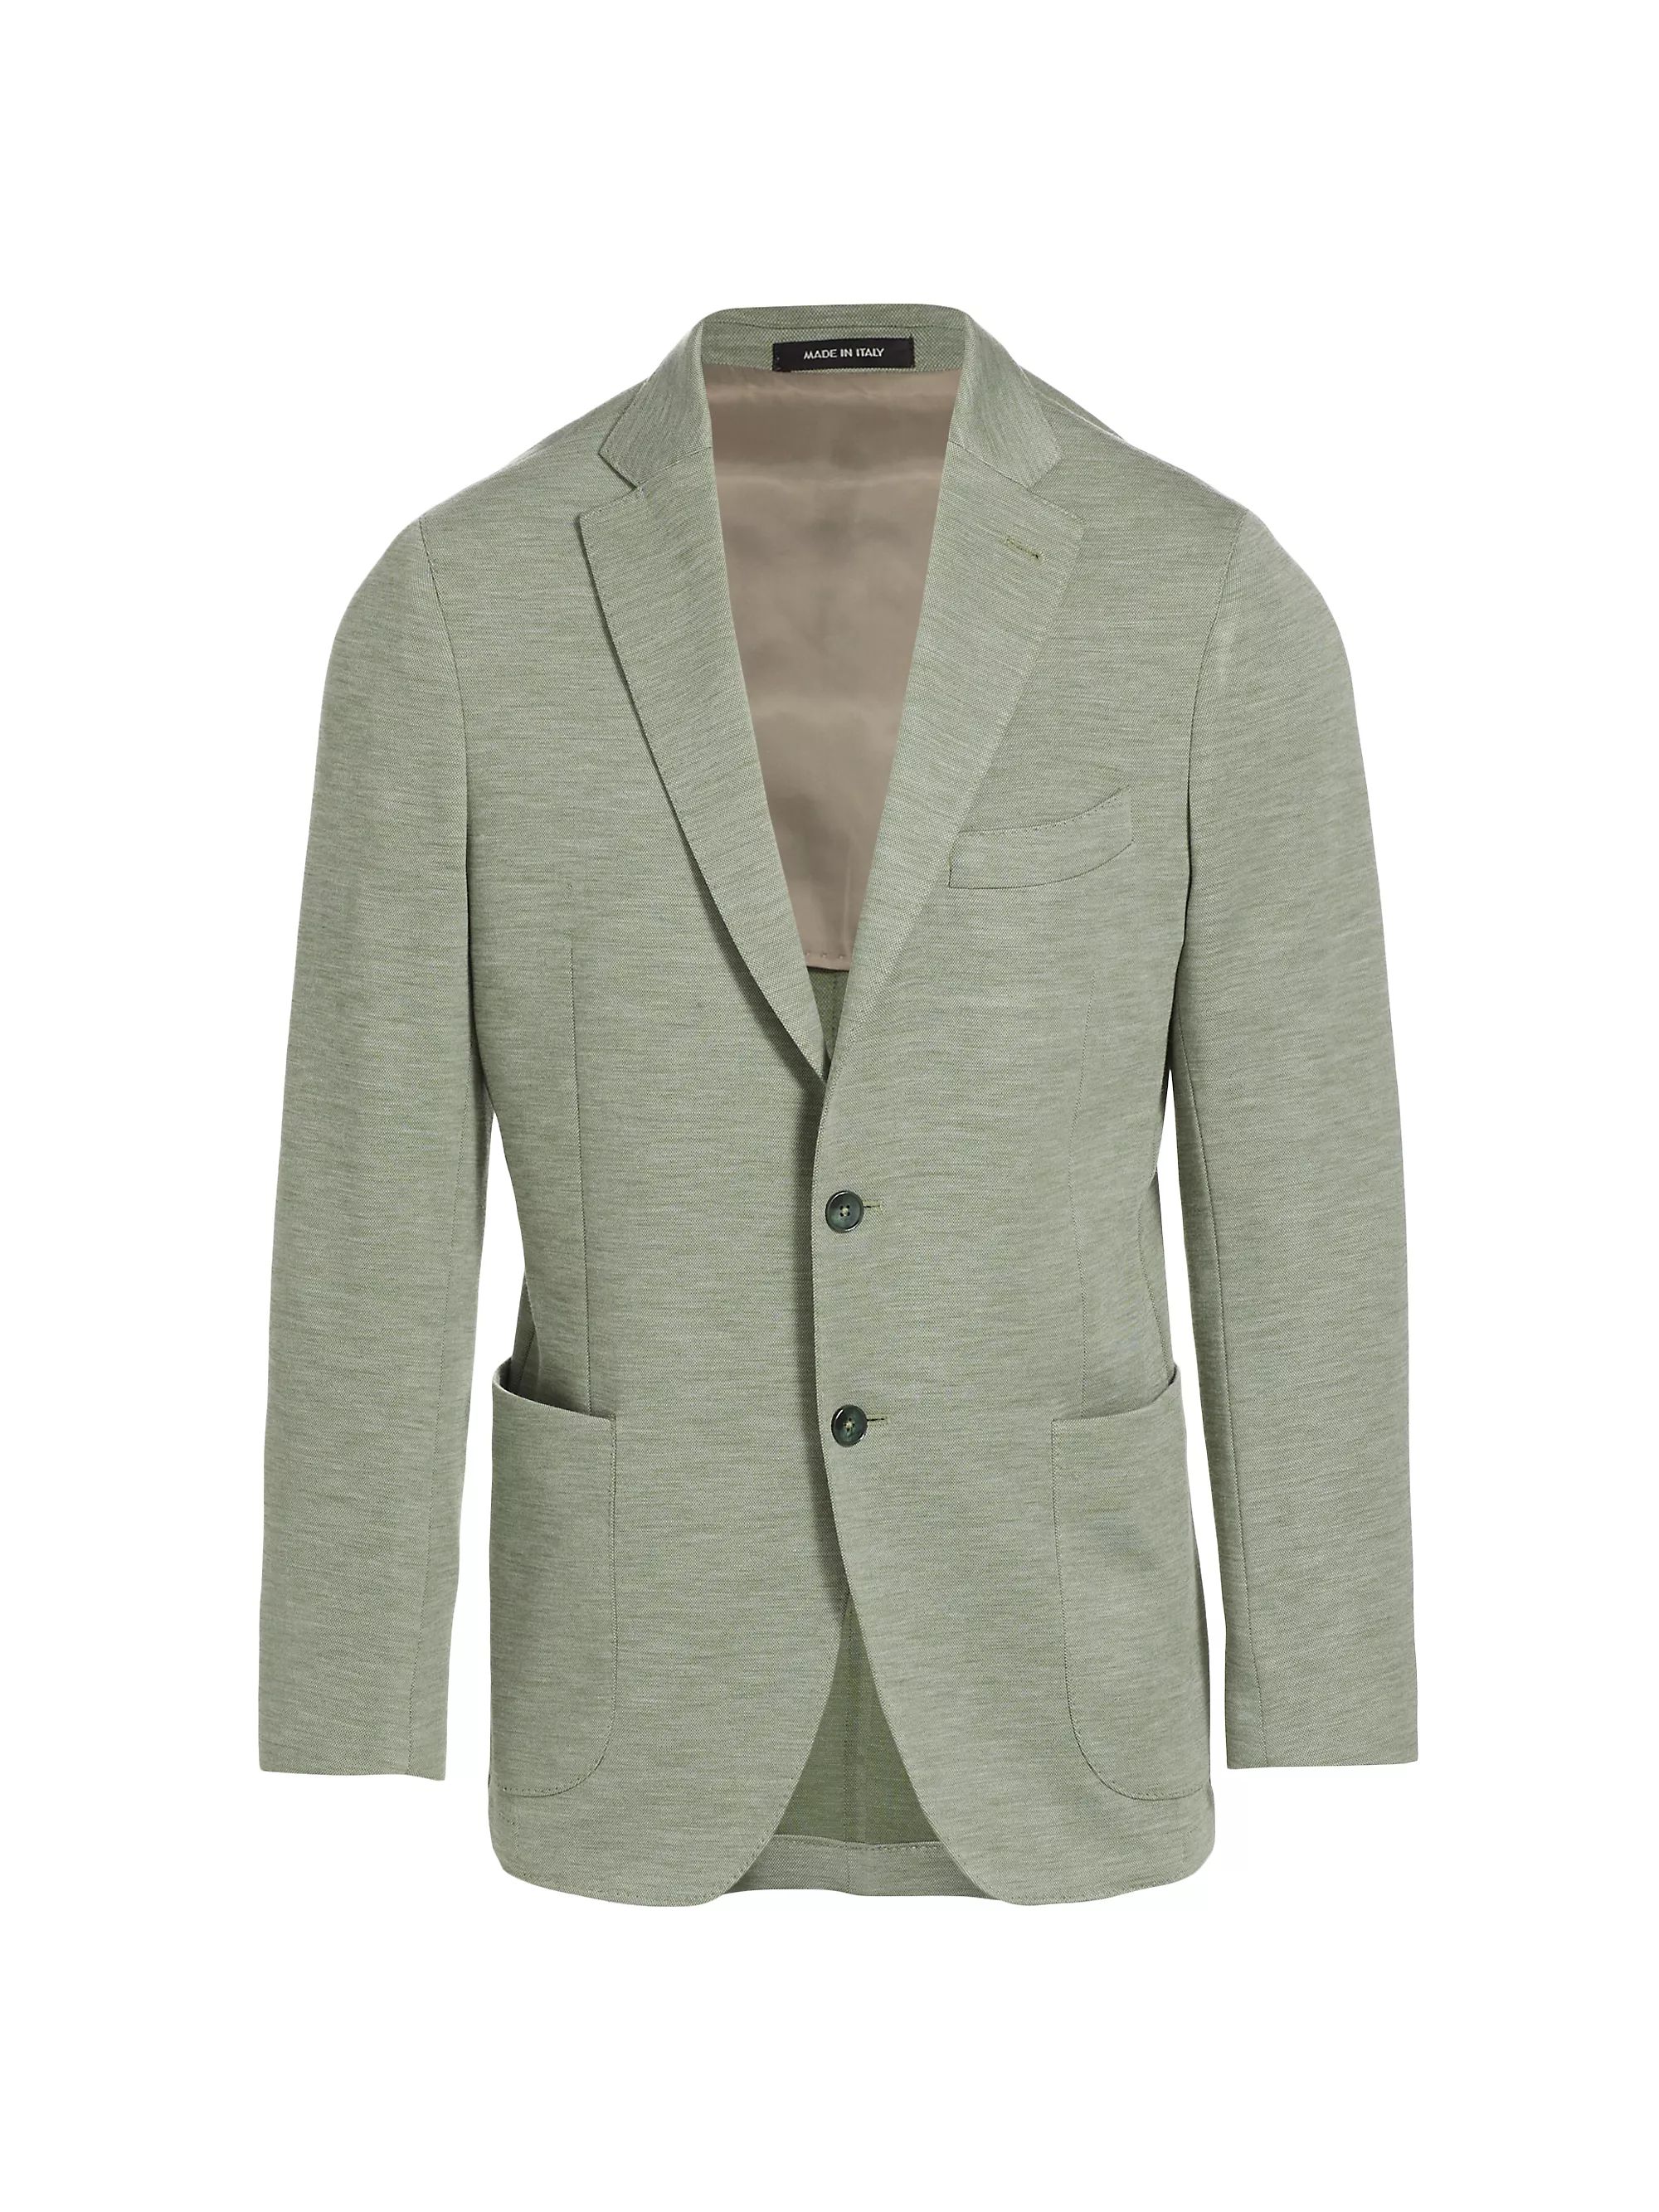 COLLECTION Heather Knit Sportcoat | Saks Fifth Avenue